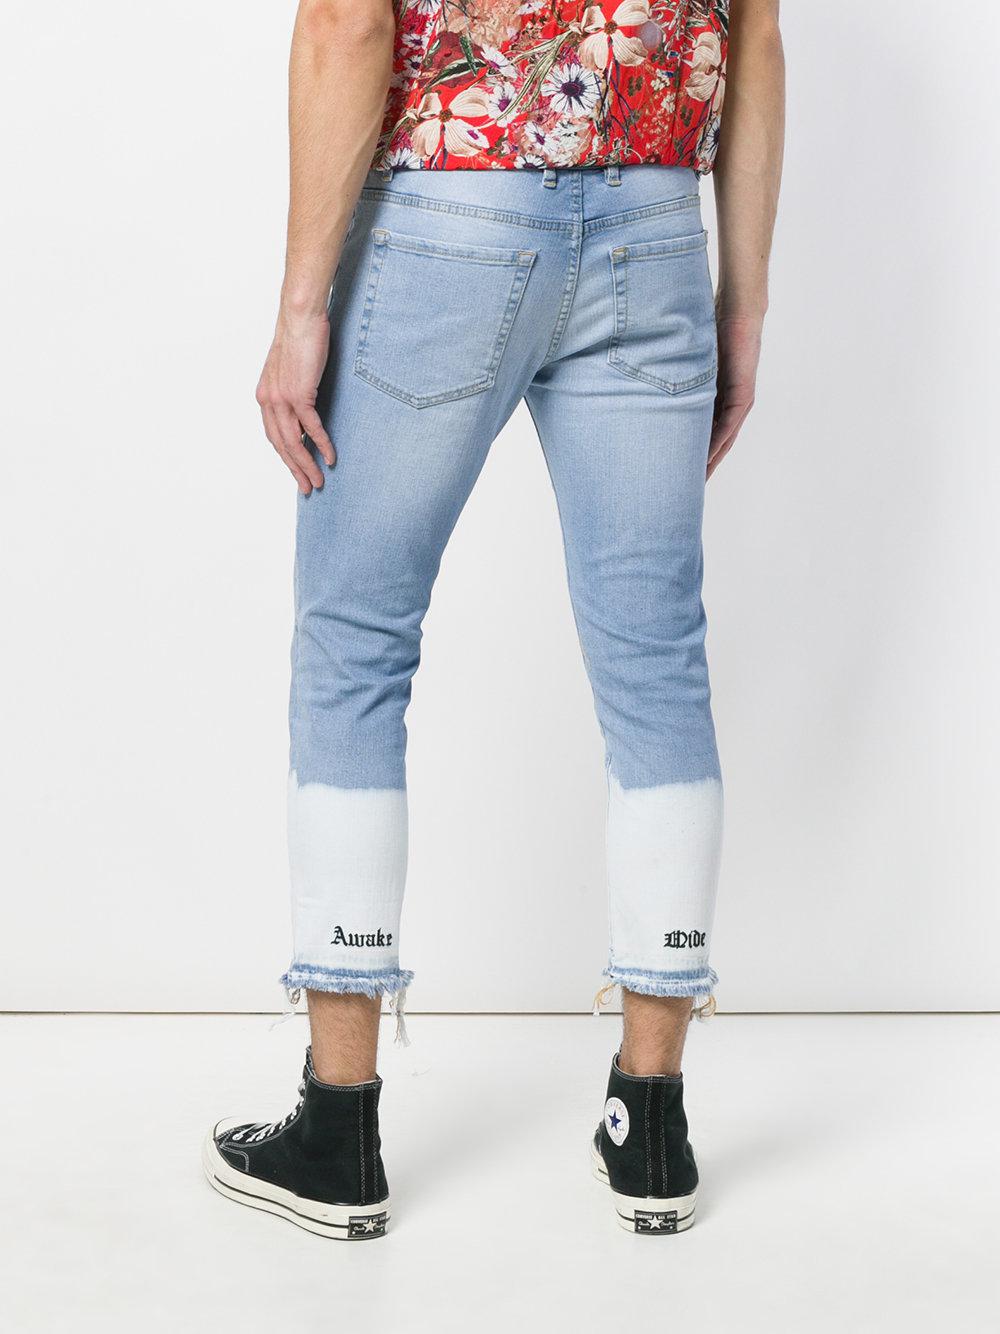 Represent Denim Contrast Cropped Jeans in Blue for Men - Lyst